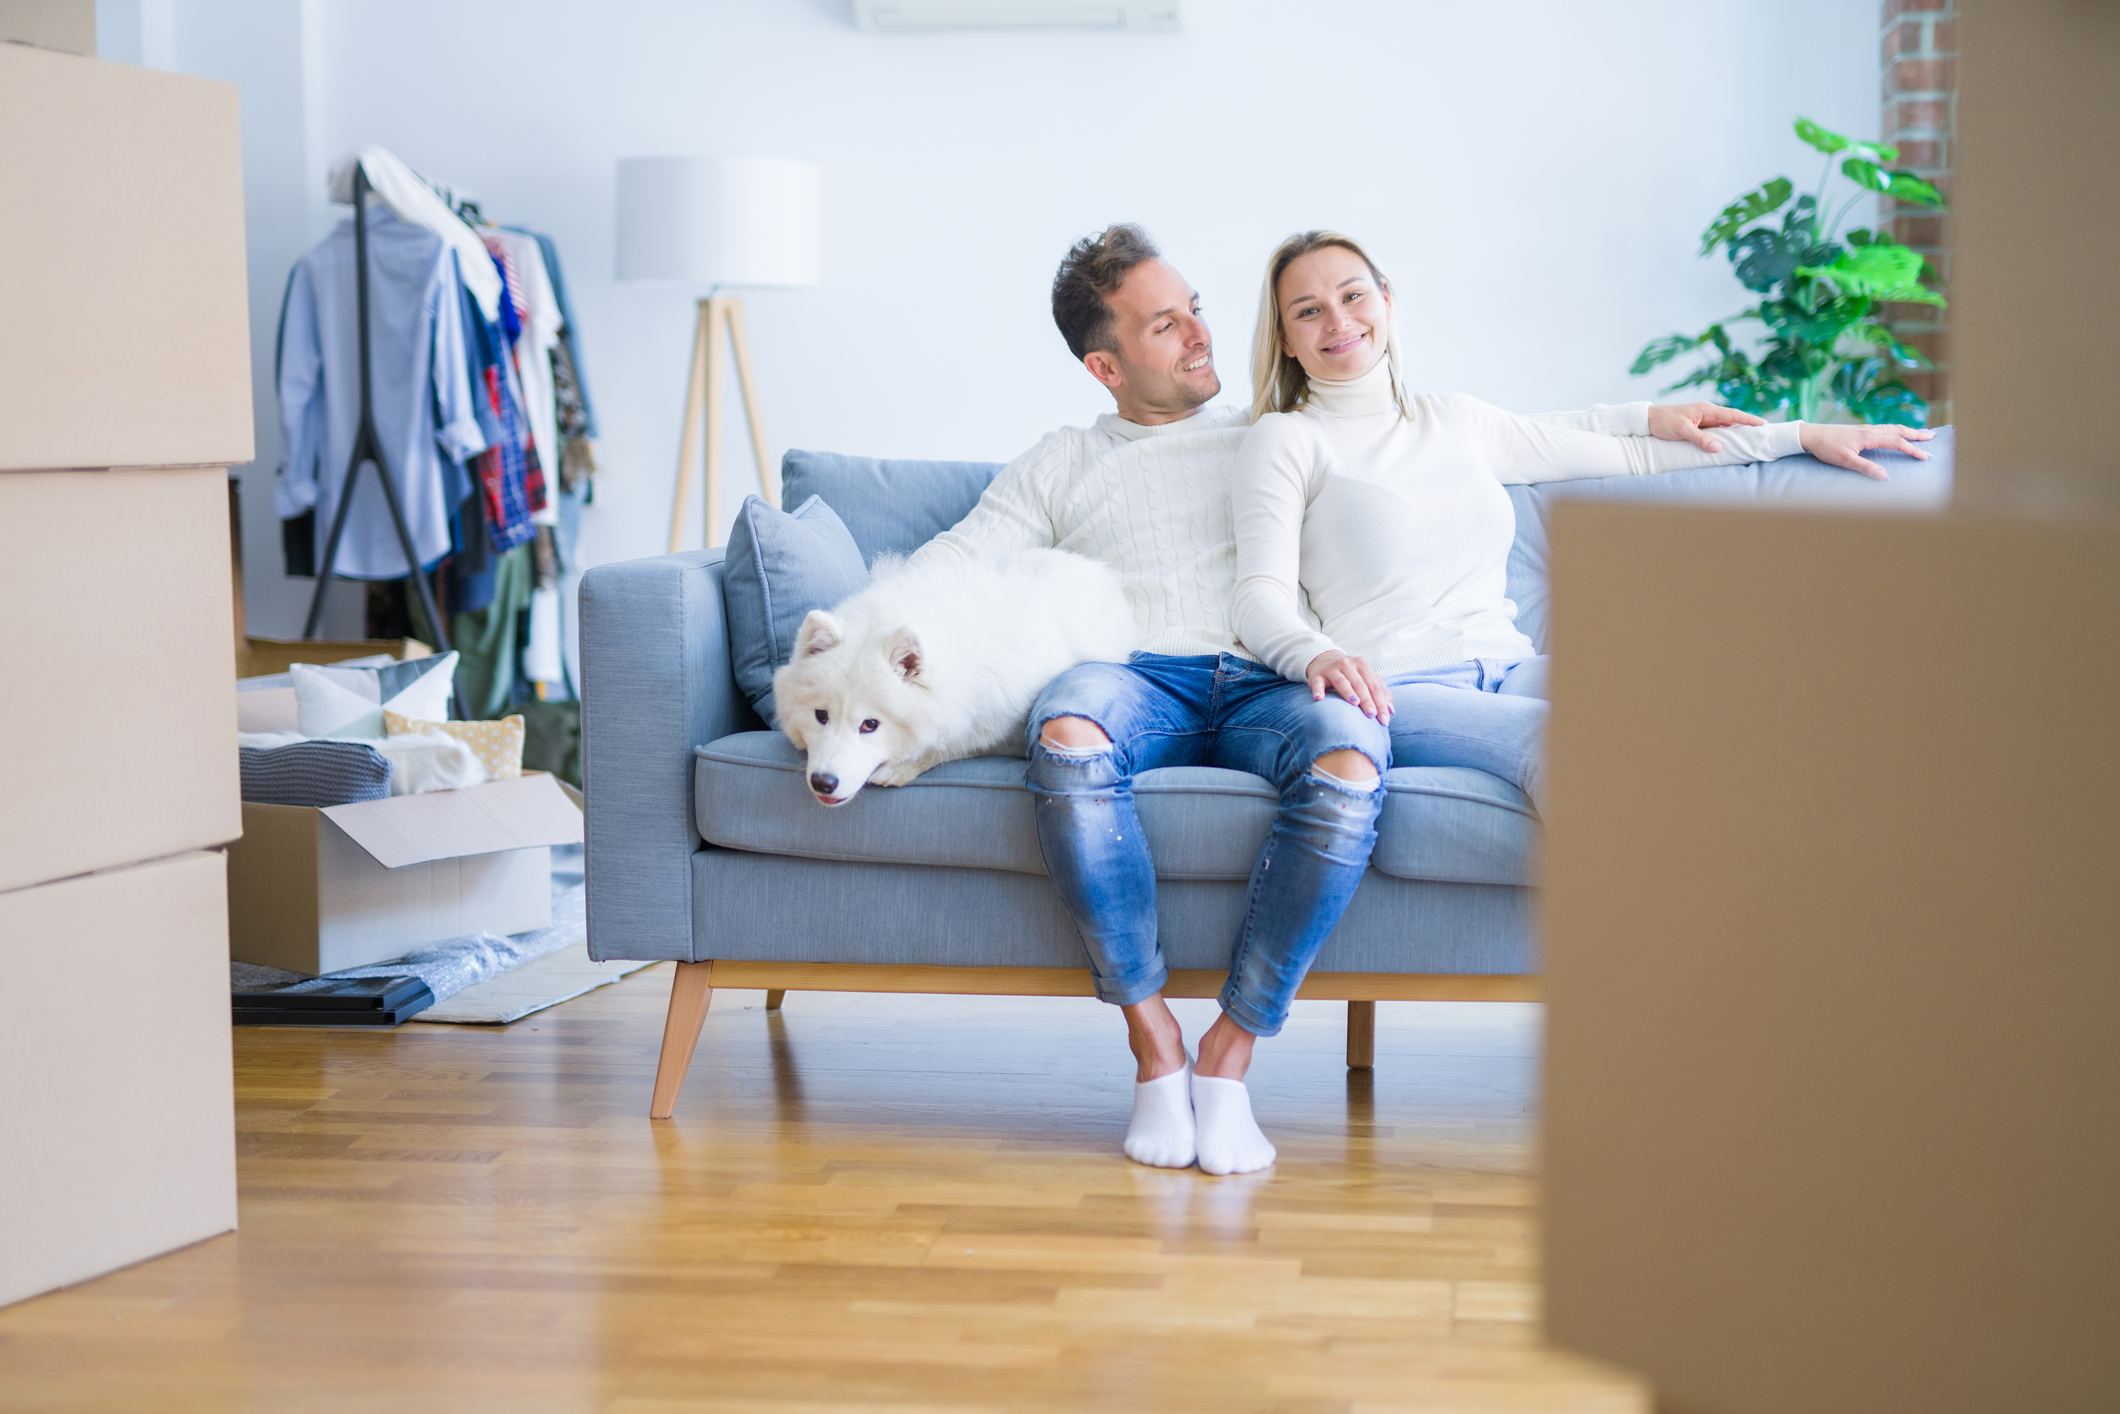 Moving-In Together: 5 Ways To Make Space For Your Partner